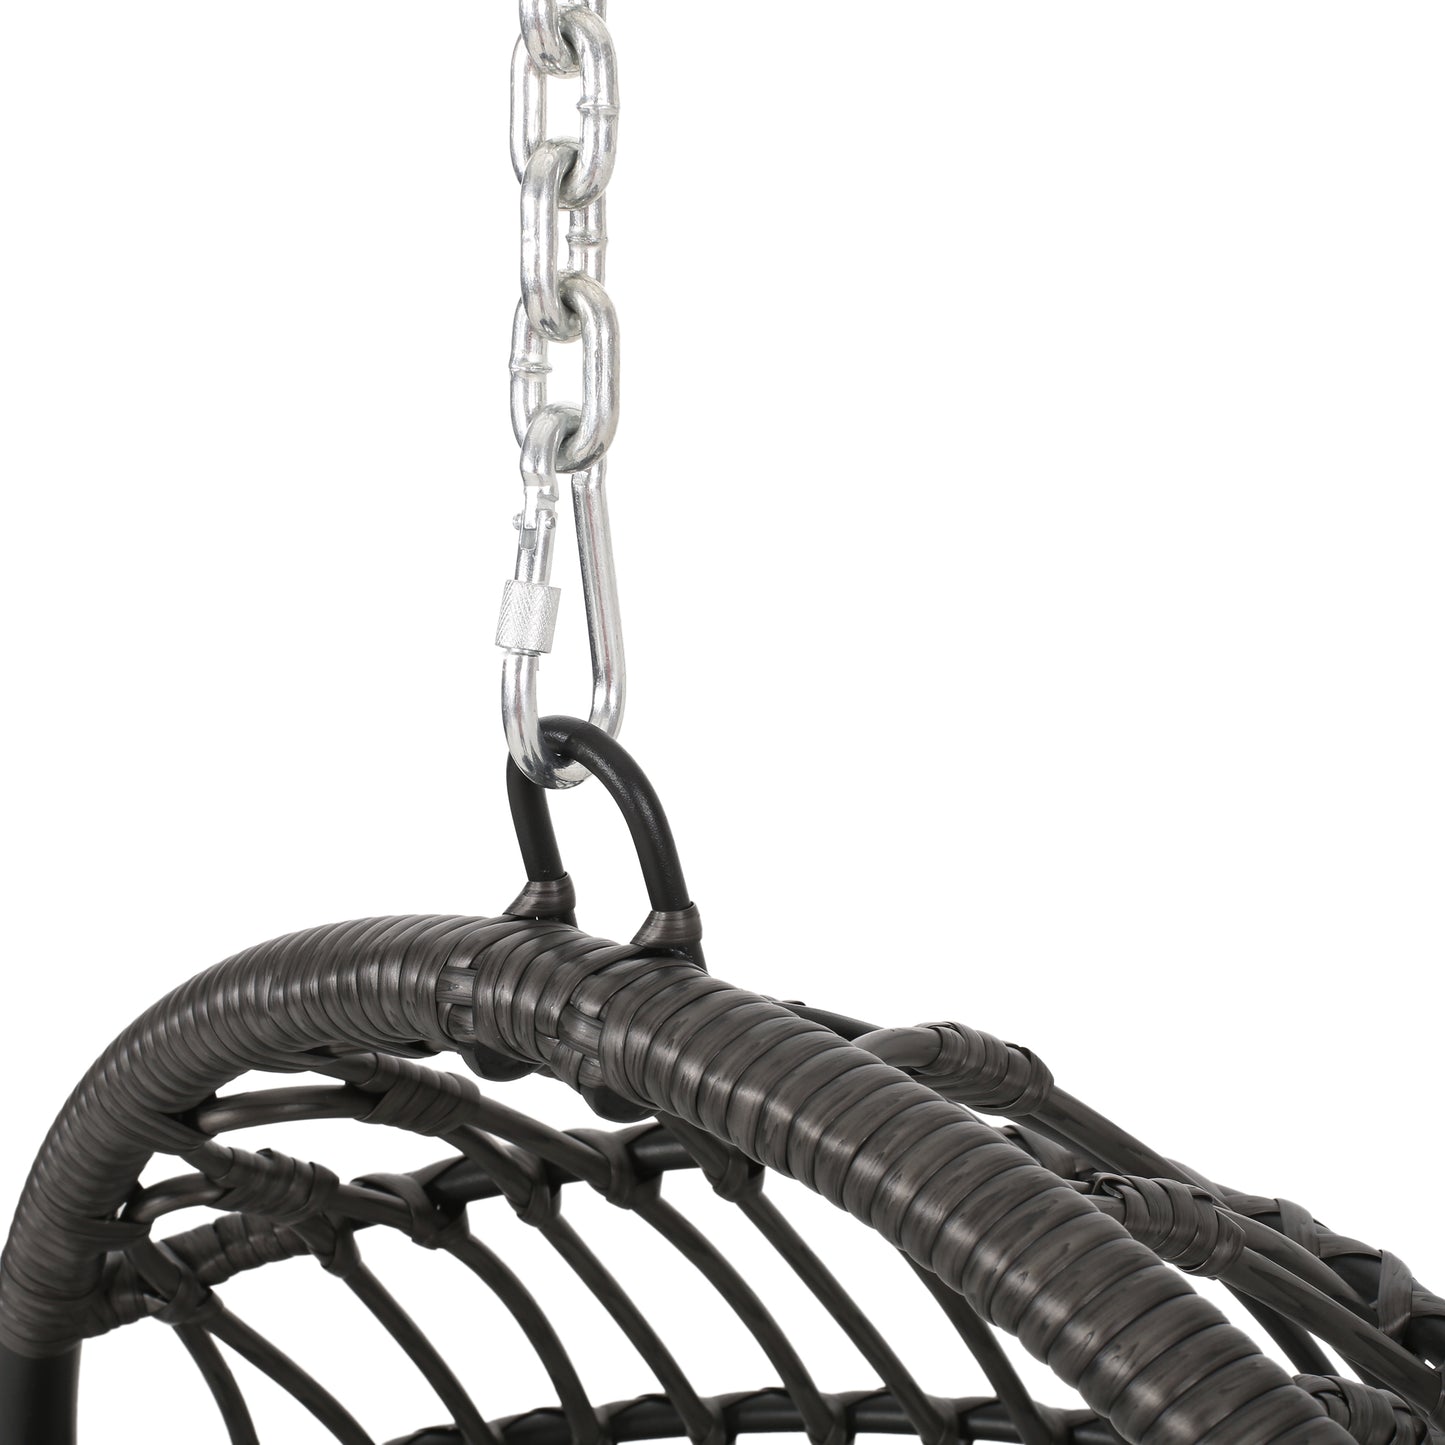 Perry Outdoor Wicker Hanging Nest Chair with Stand